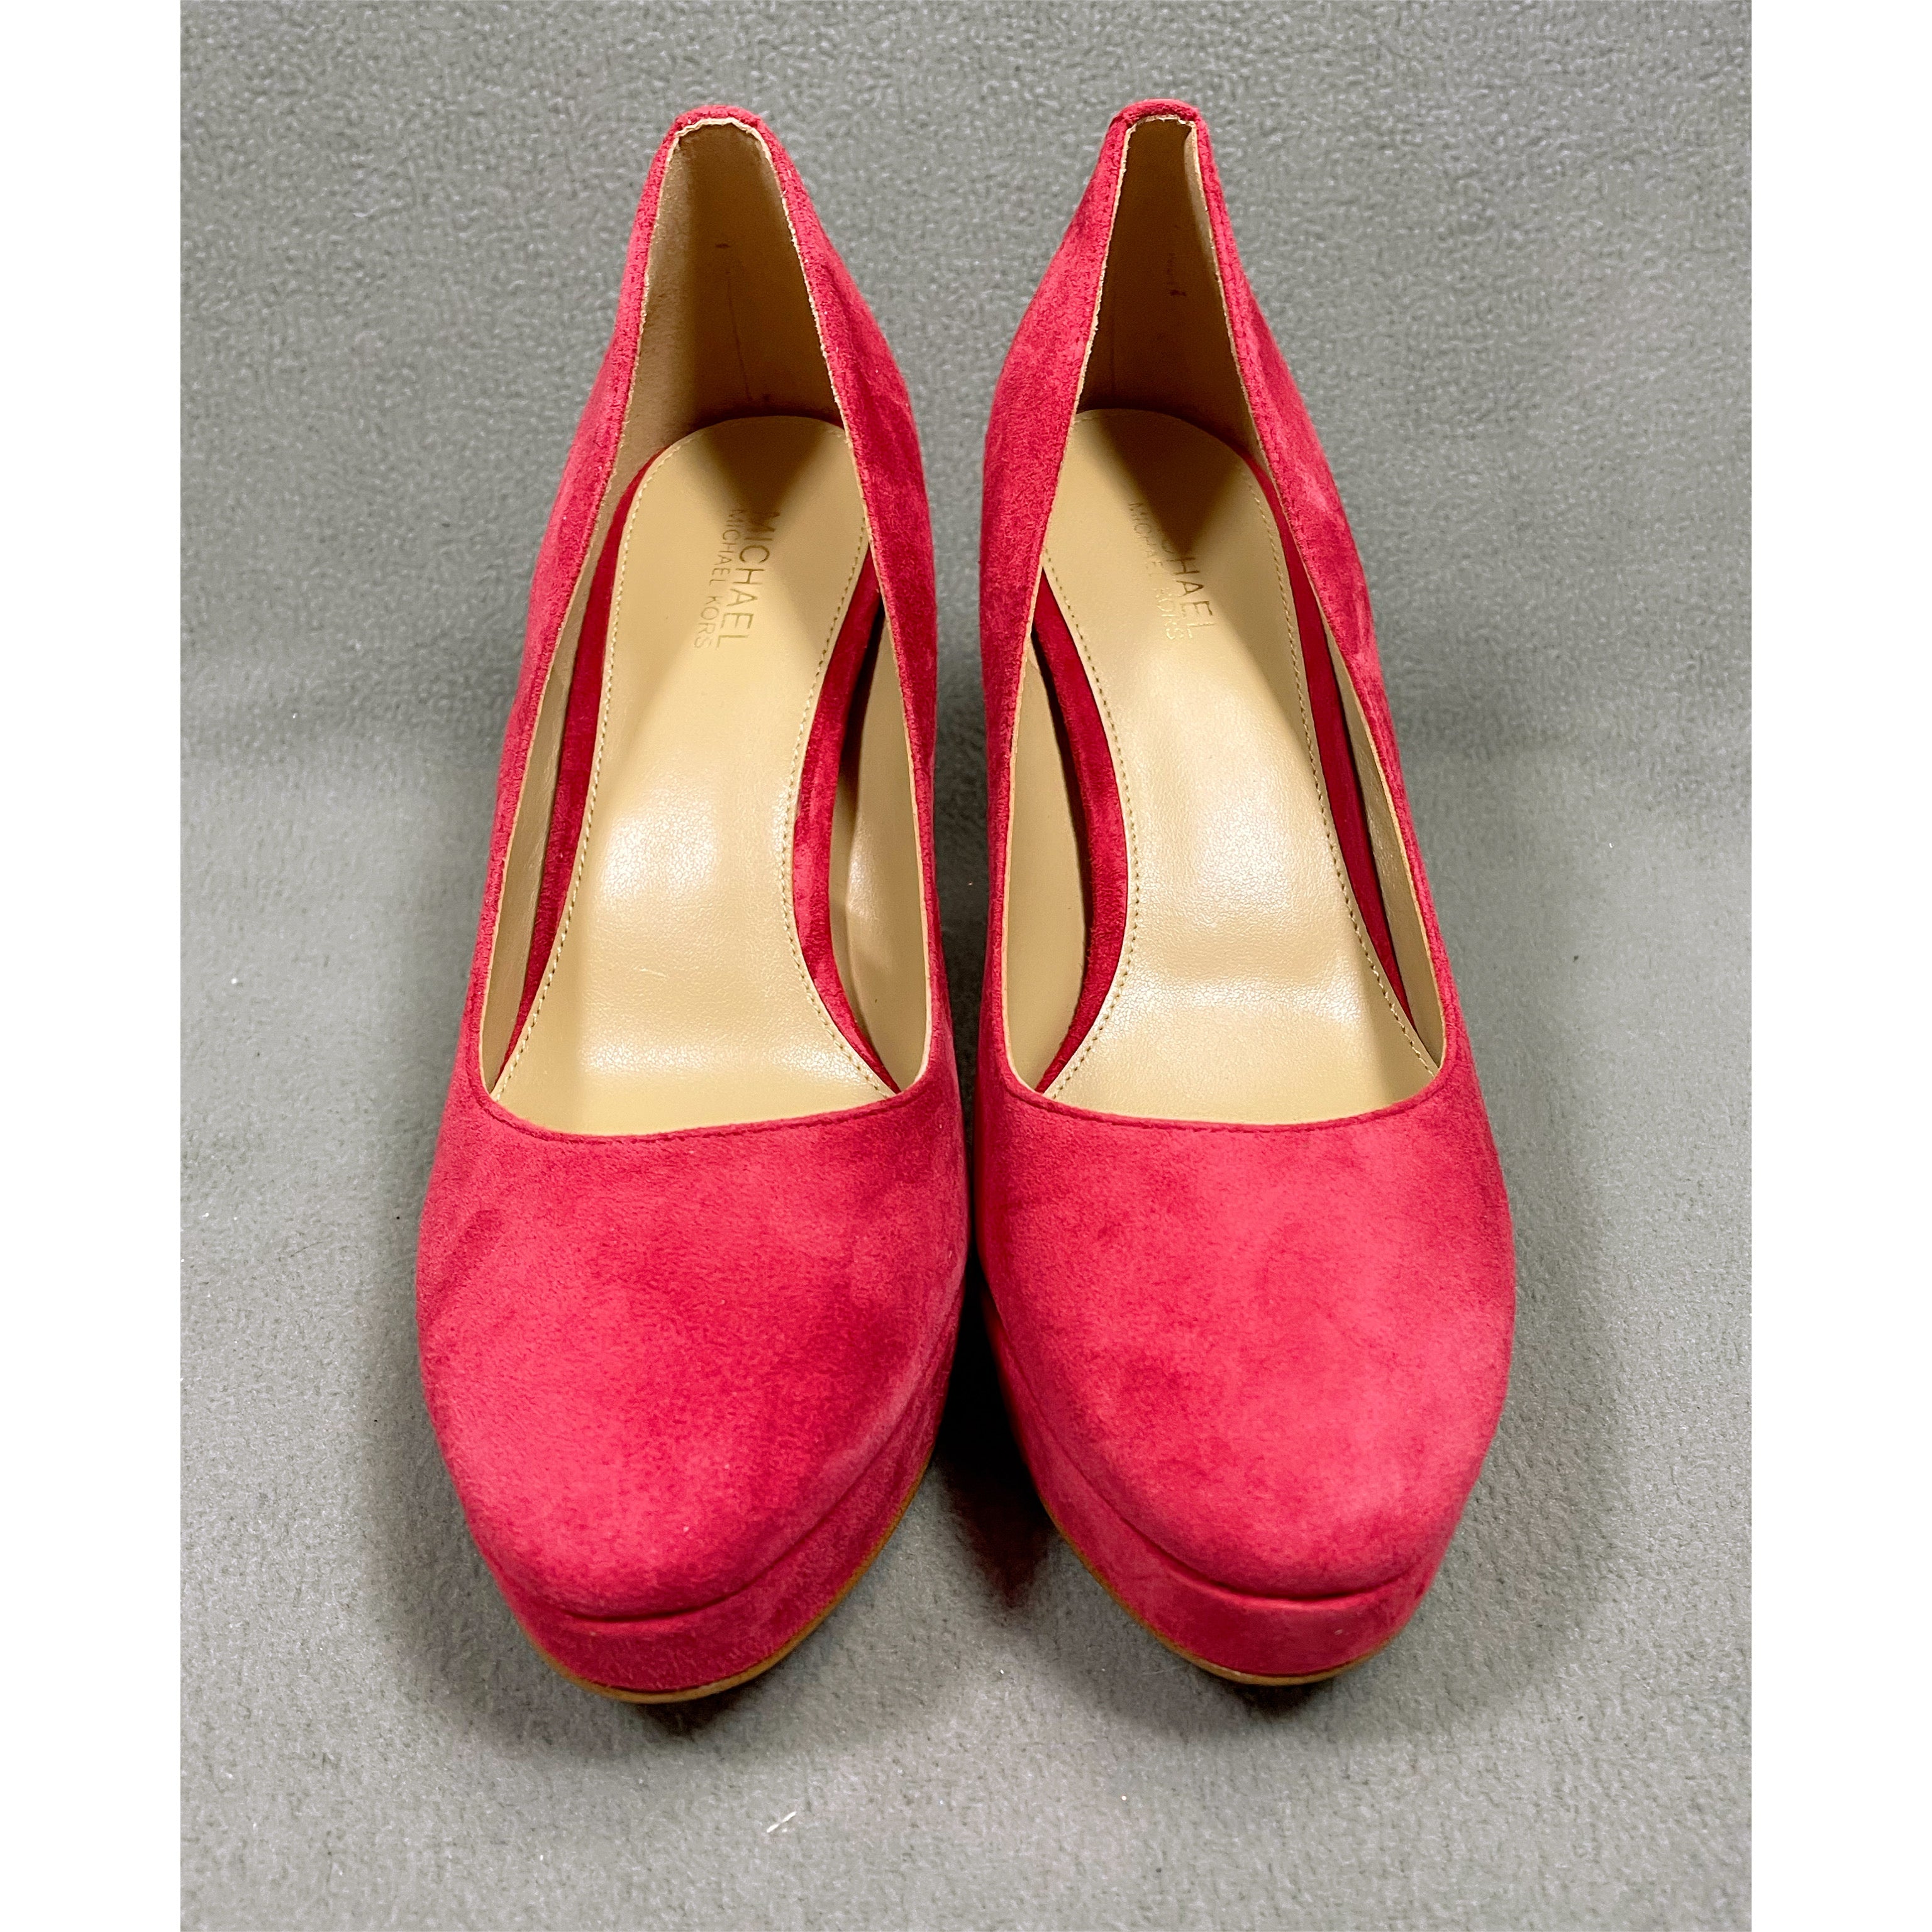 Michael Kors red suede Chantal pump, size 6.5 NEW IN BOX!